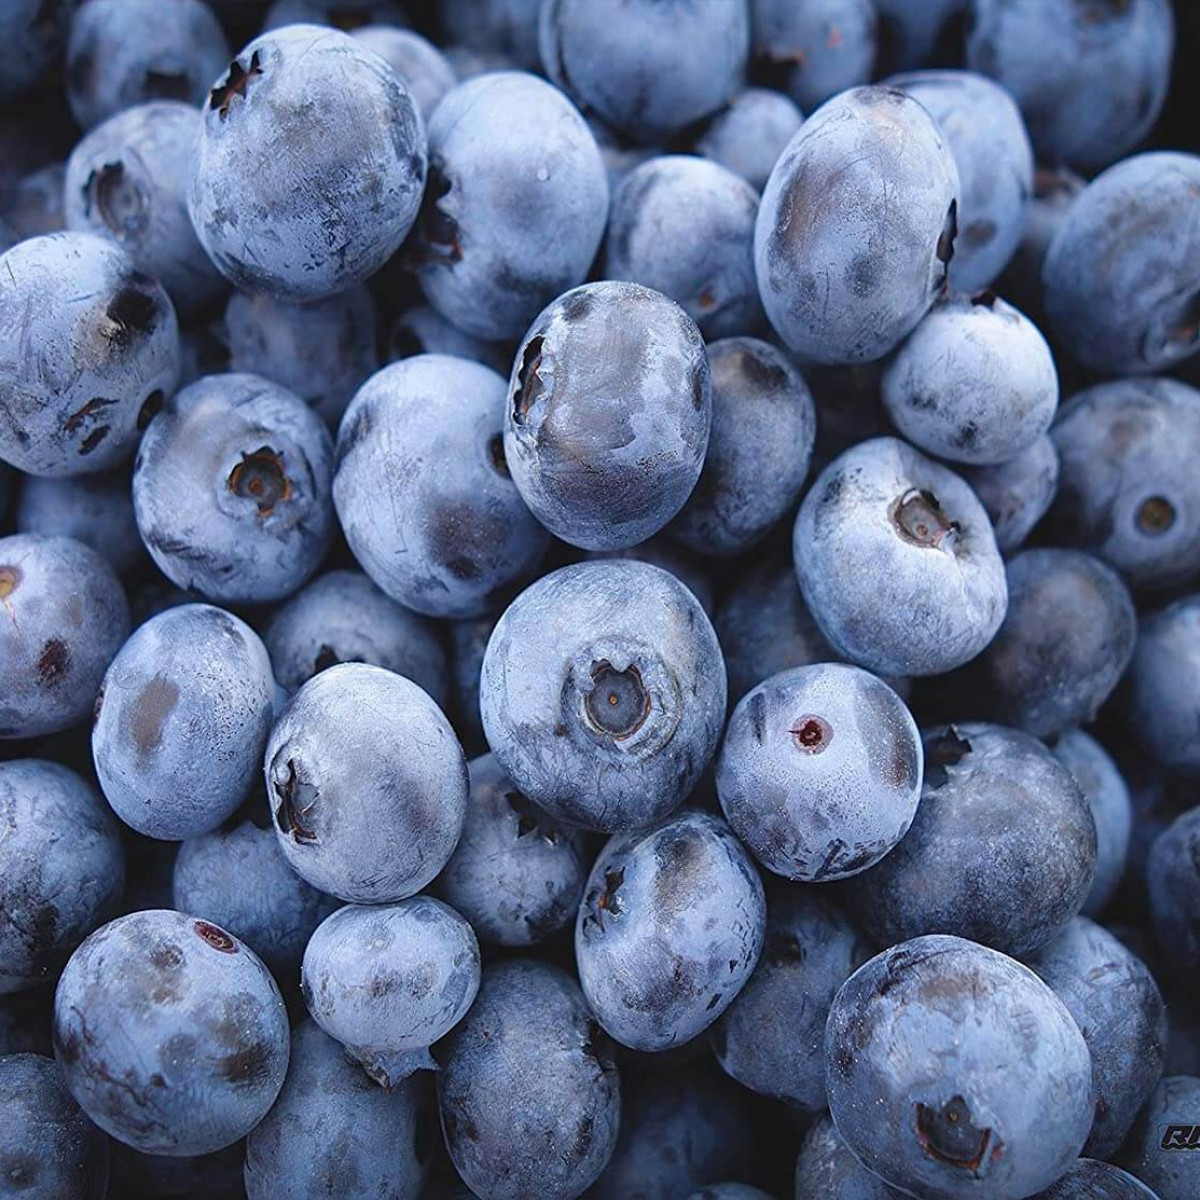 U-pick blueberries at Rowell Brothers Berry Farm